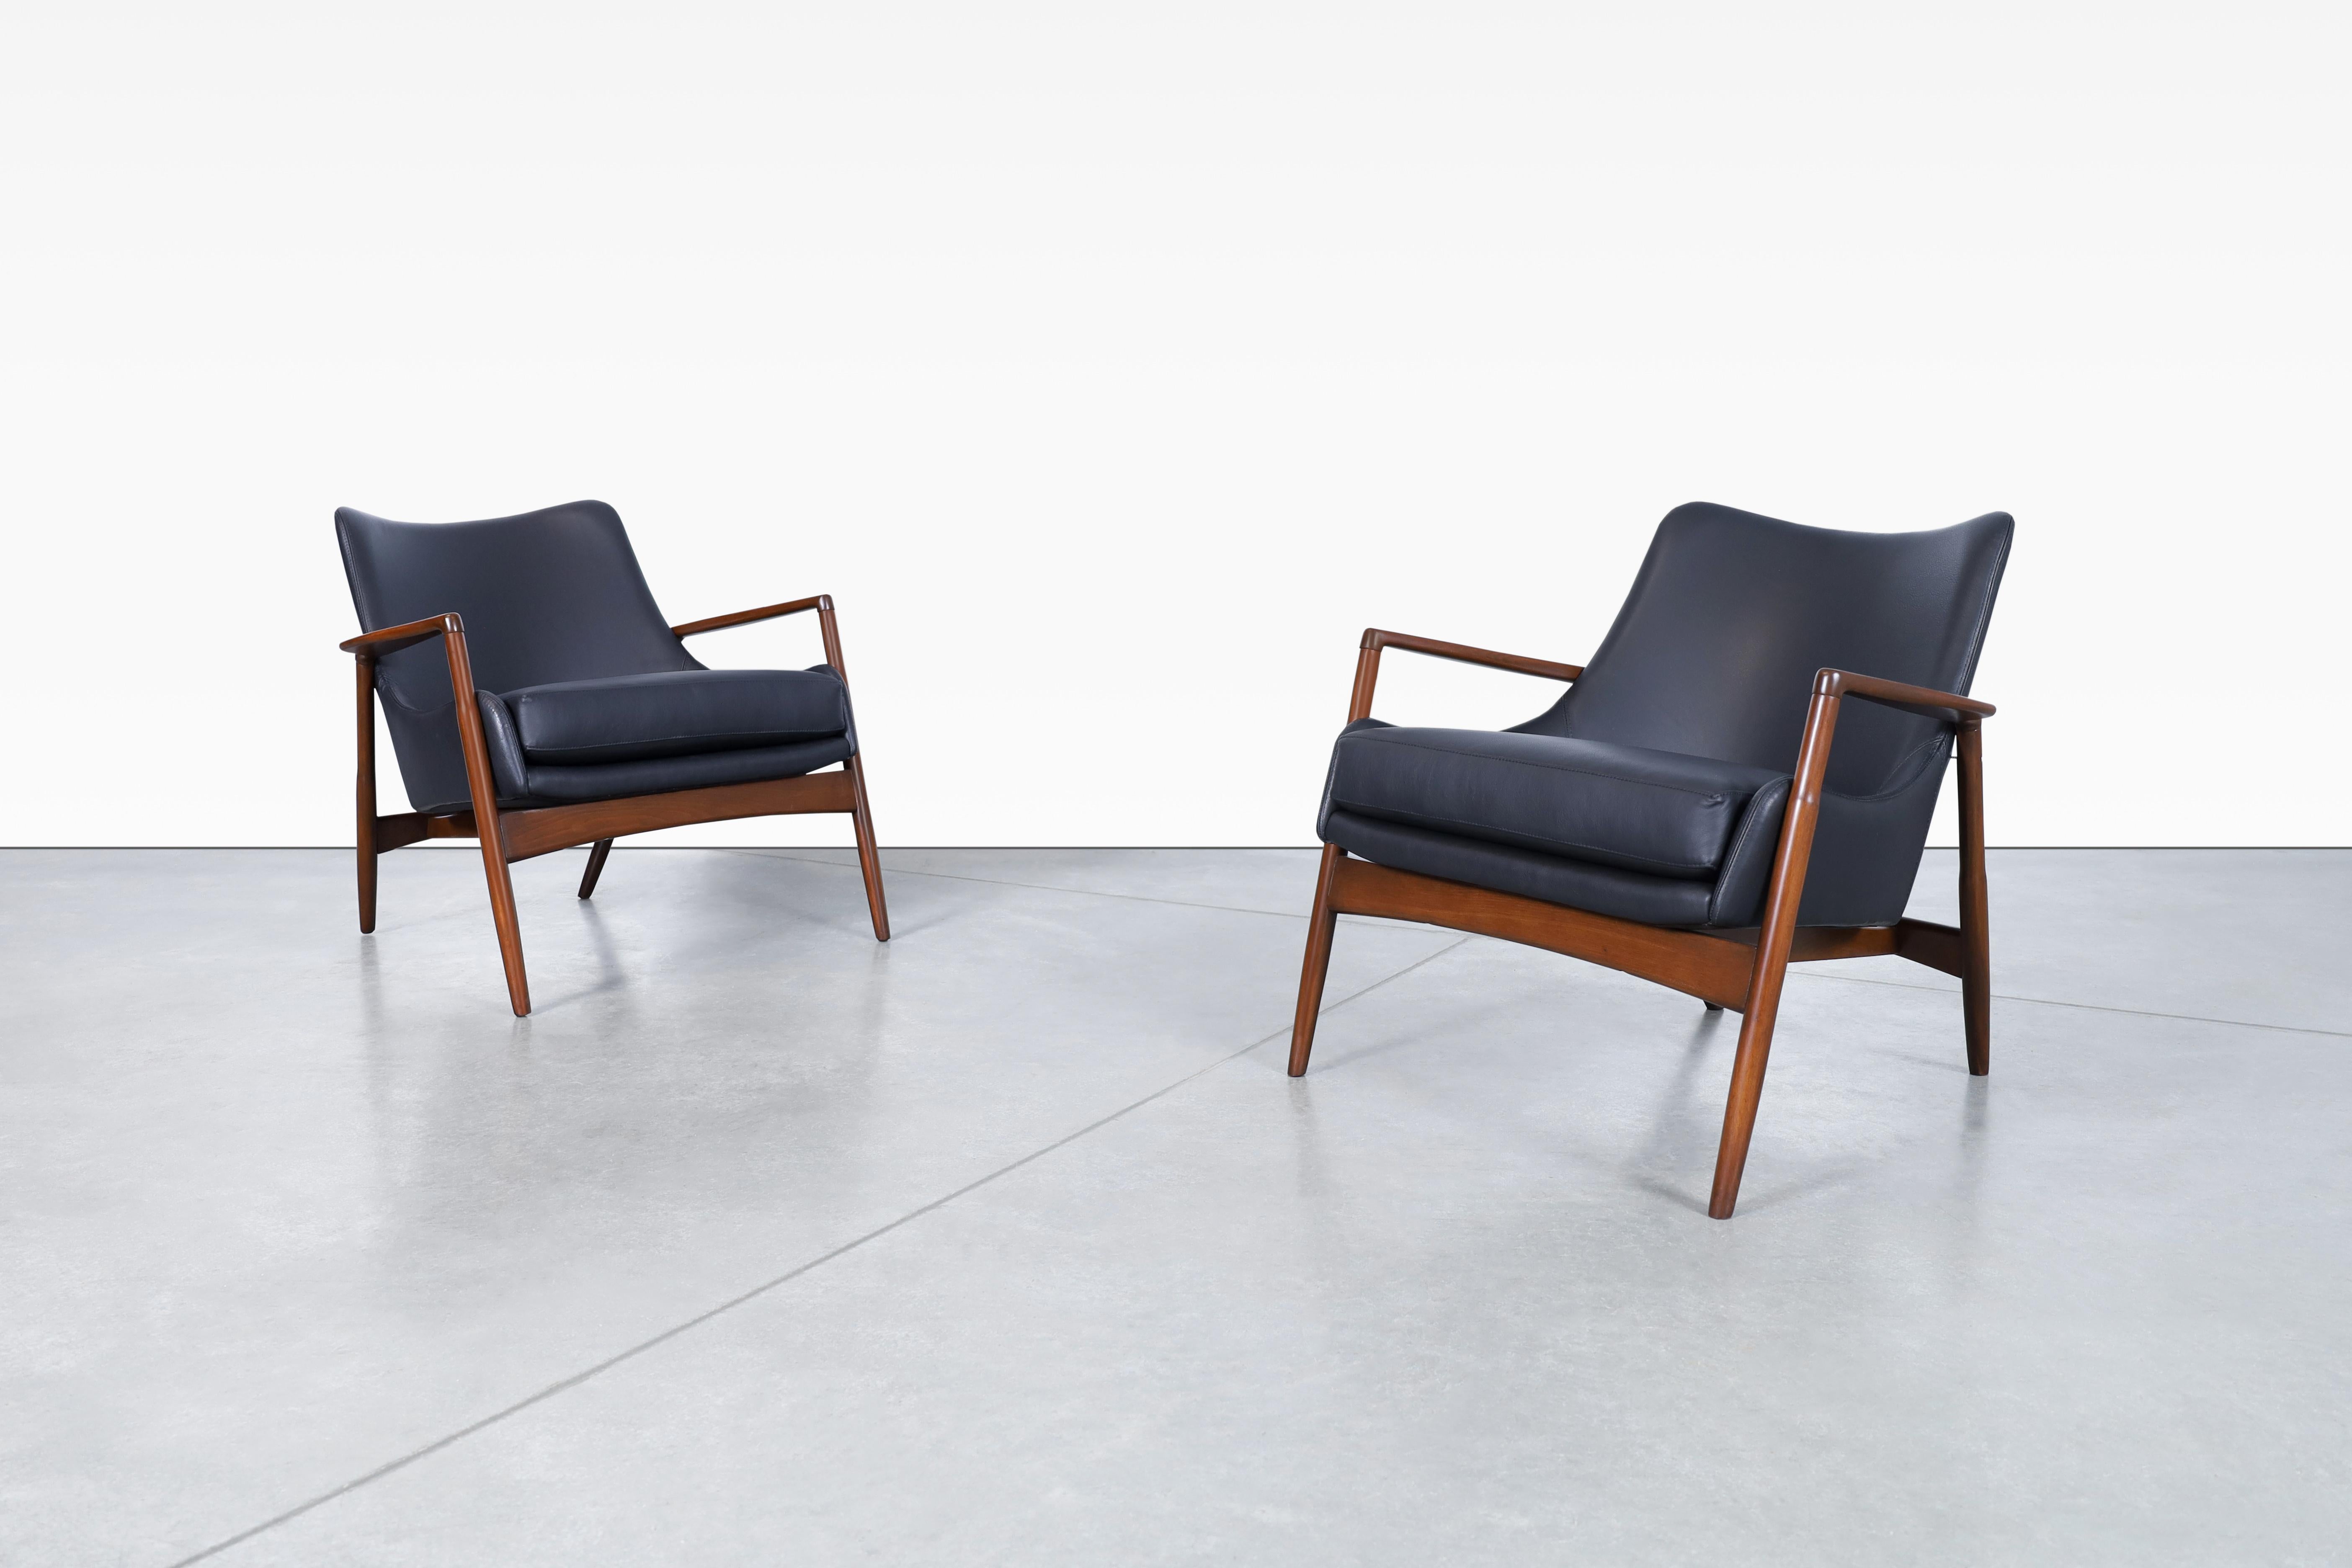 Stunning Danish modern leather lounge chairs by Ib Kofod Larsen for Selig in Denmark, circa 1950s. The sculptural frames on these chairs are made of solid walnut stain. The well-crafted armrests and barrel shape design shows beautiful details and